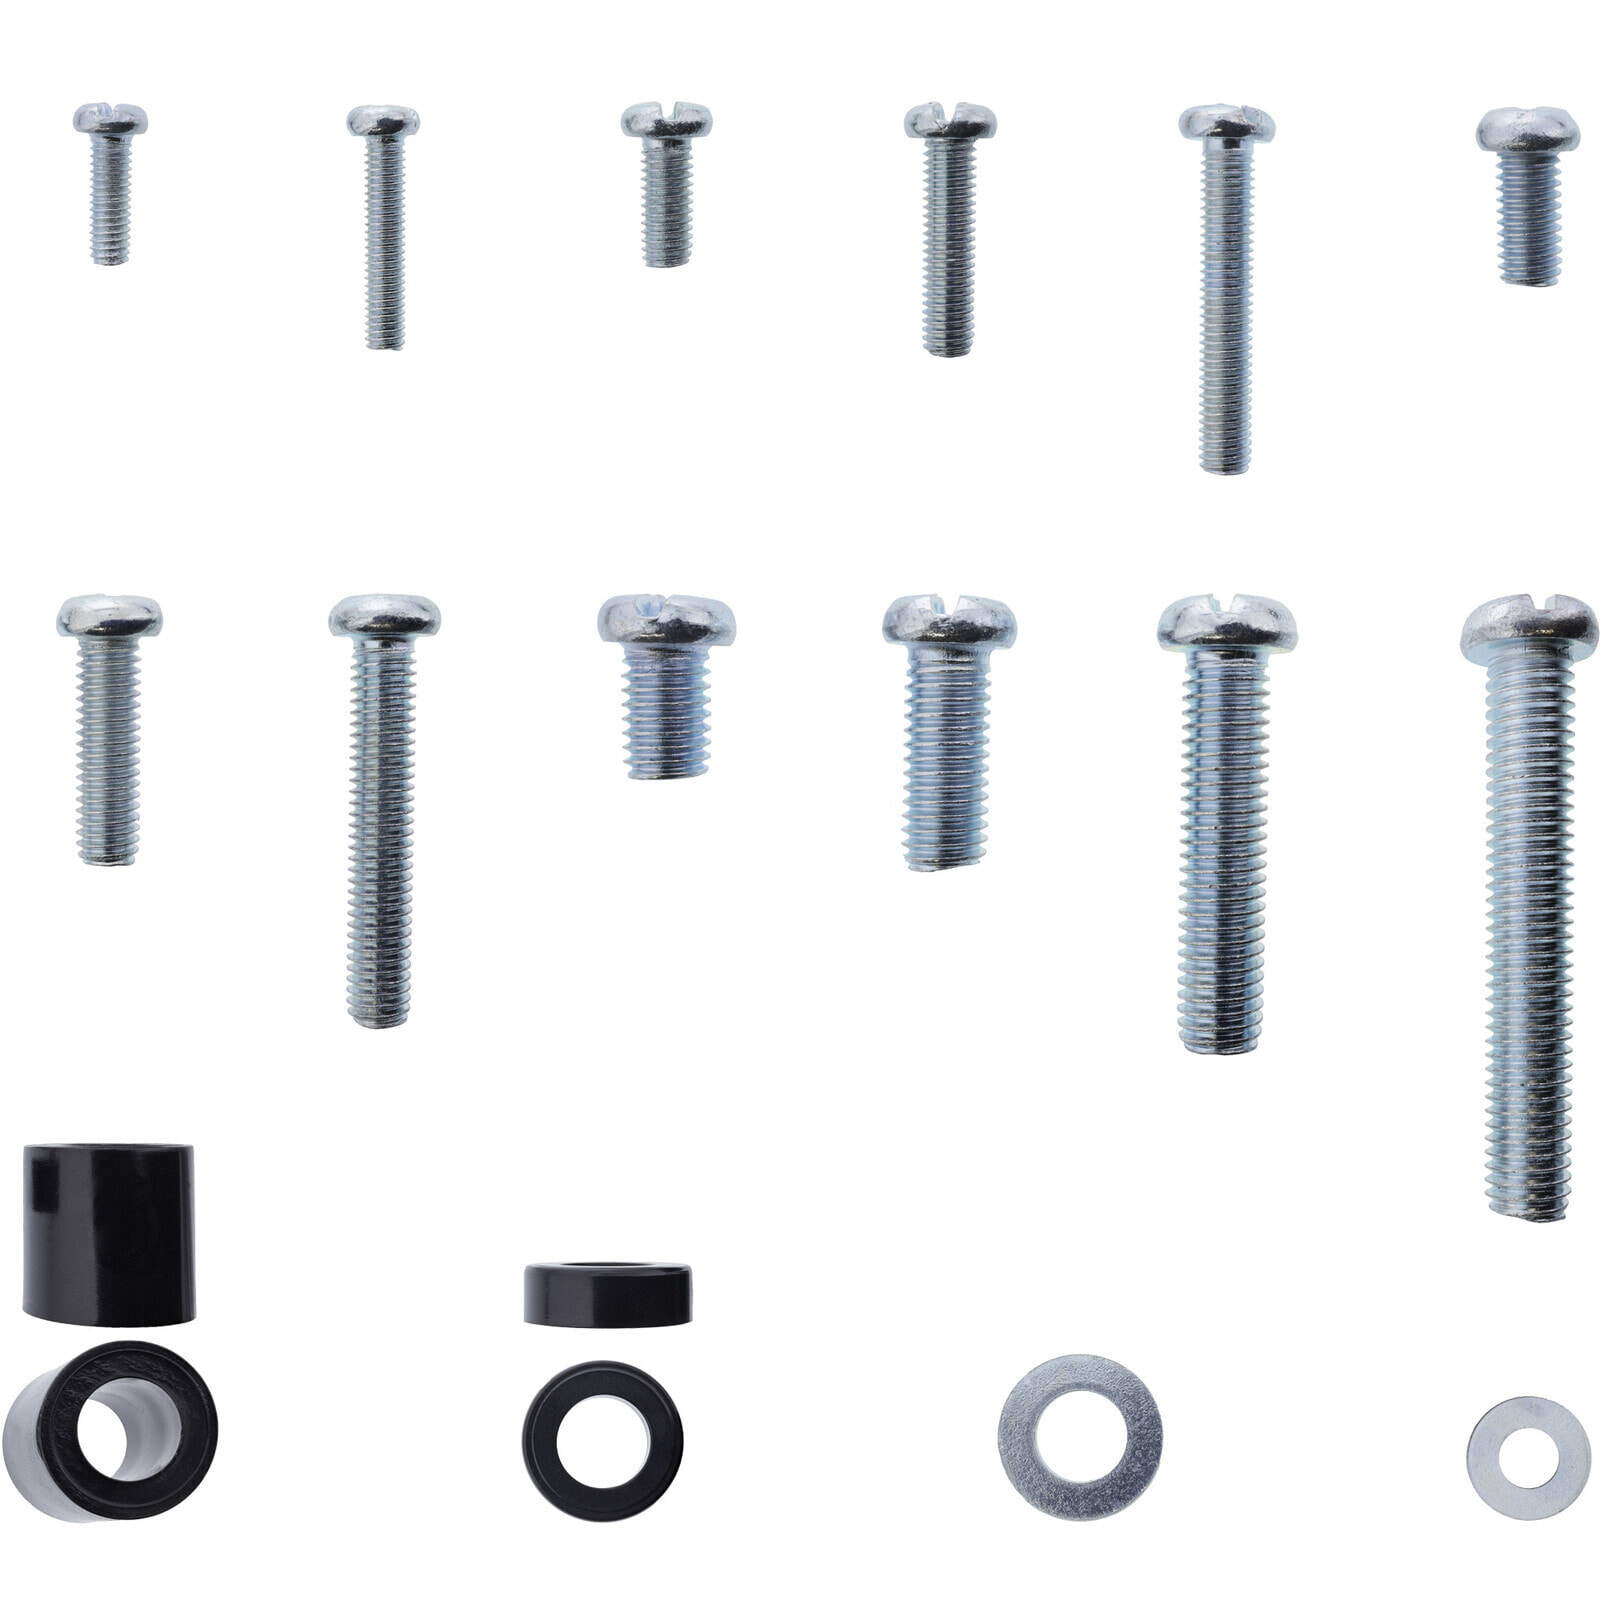 InLine Screw set 68 pieces for TV wall mount - Wall - Zinc - 68 pc(s)